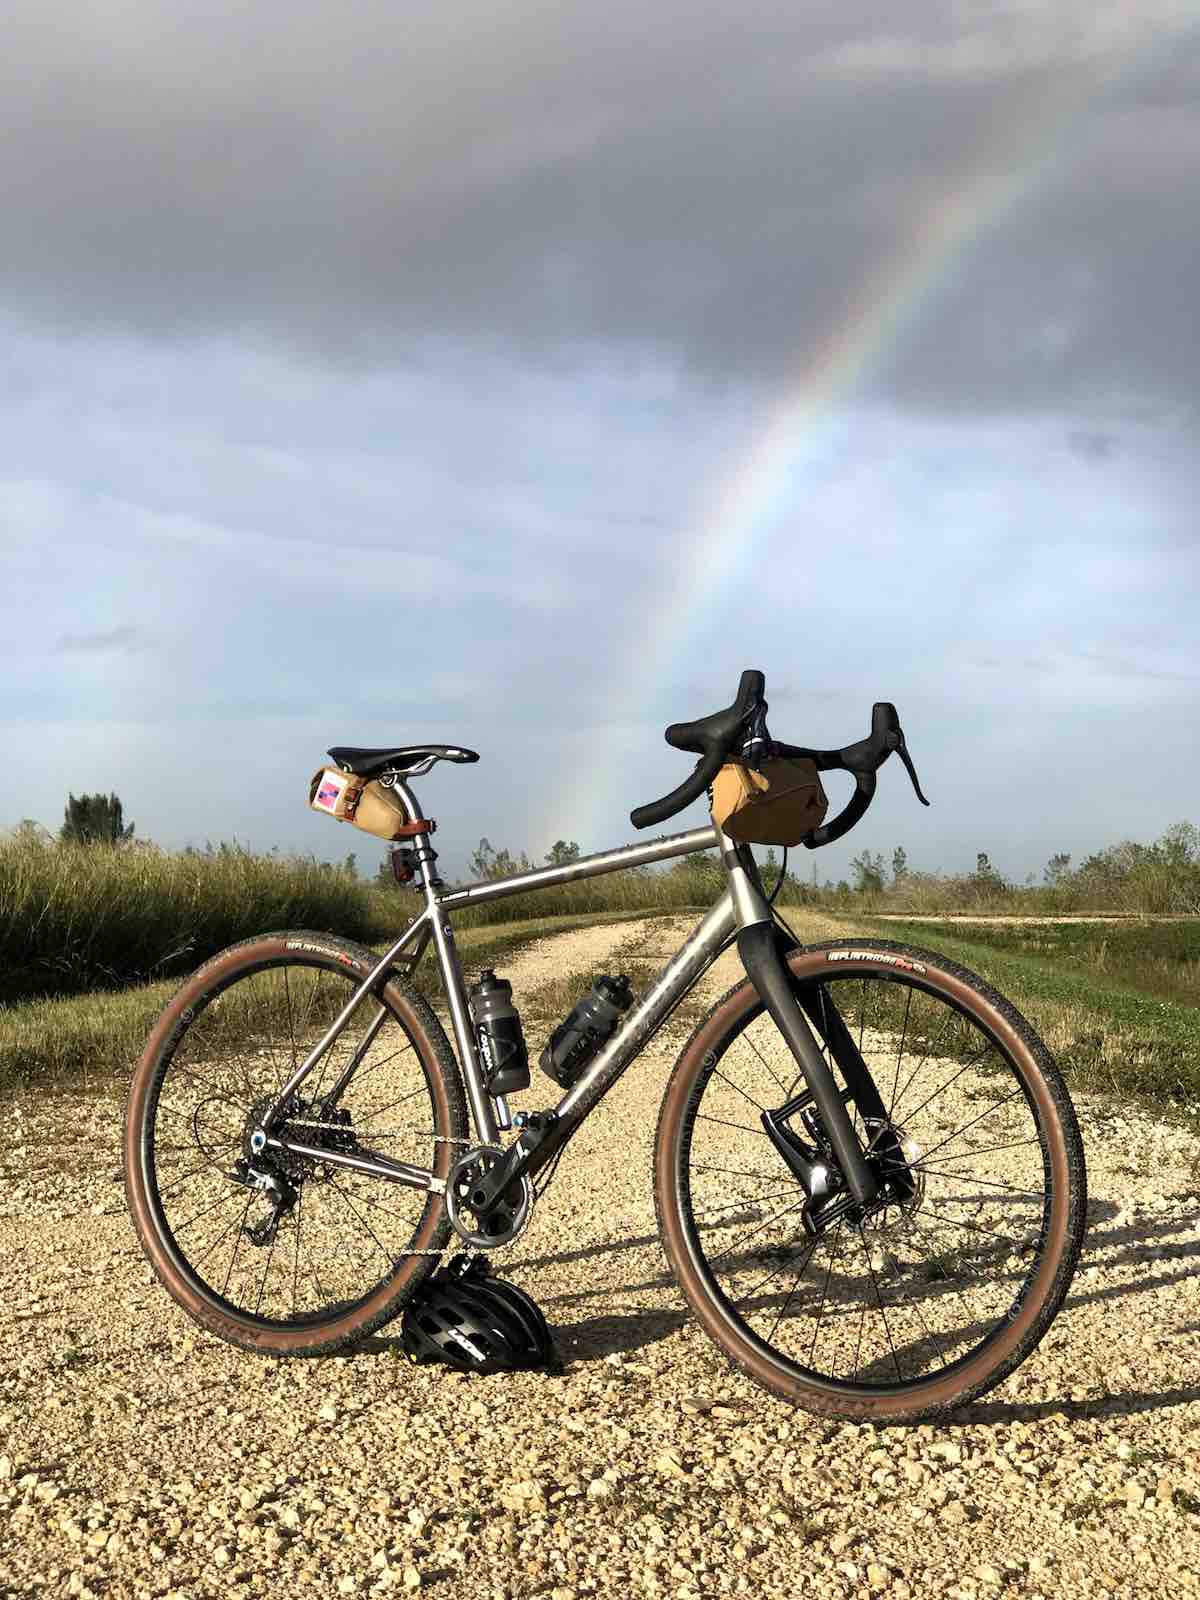 Bikerumor pic of the day lynskey bicycle in the middle of a gravel pathway with lowlands surrounding with cloudy skies and a rainbow in the distance